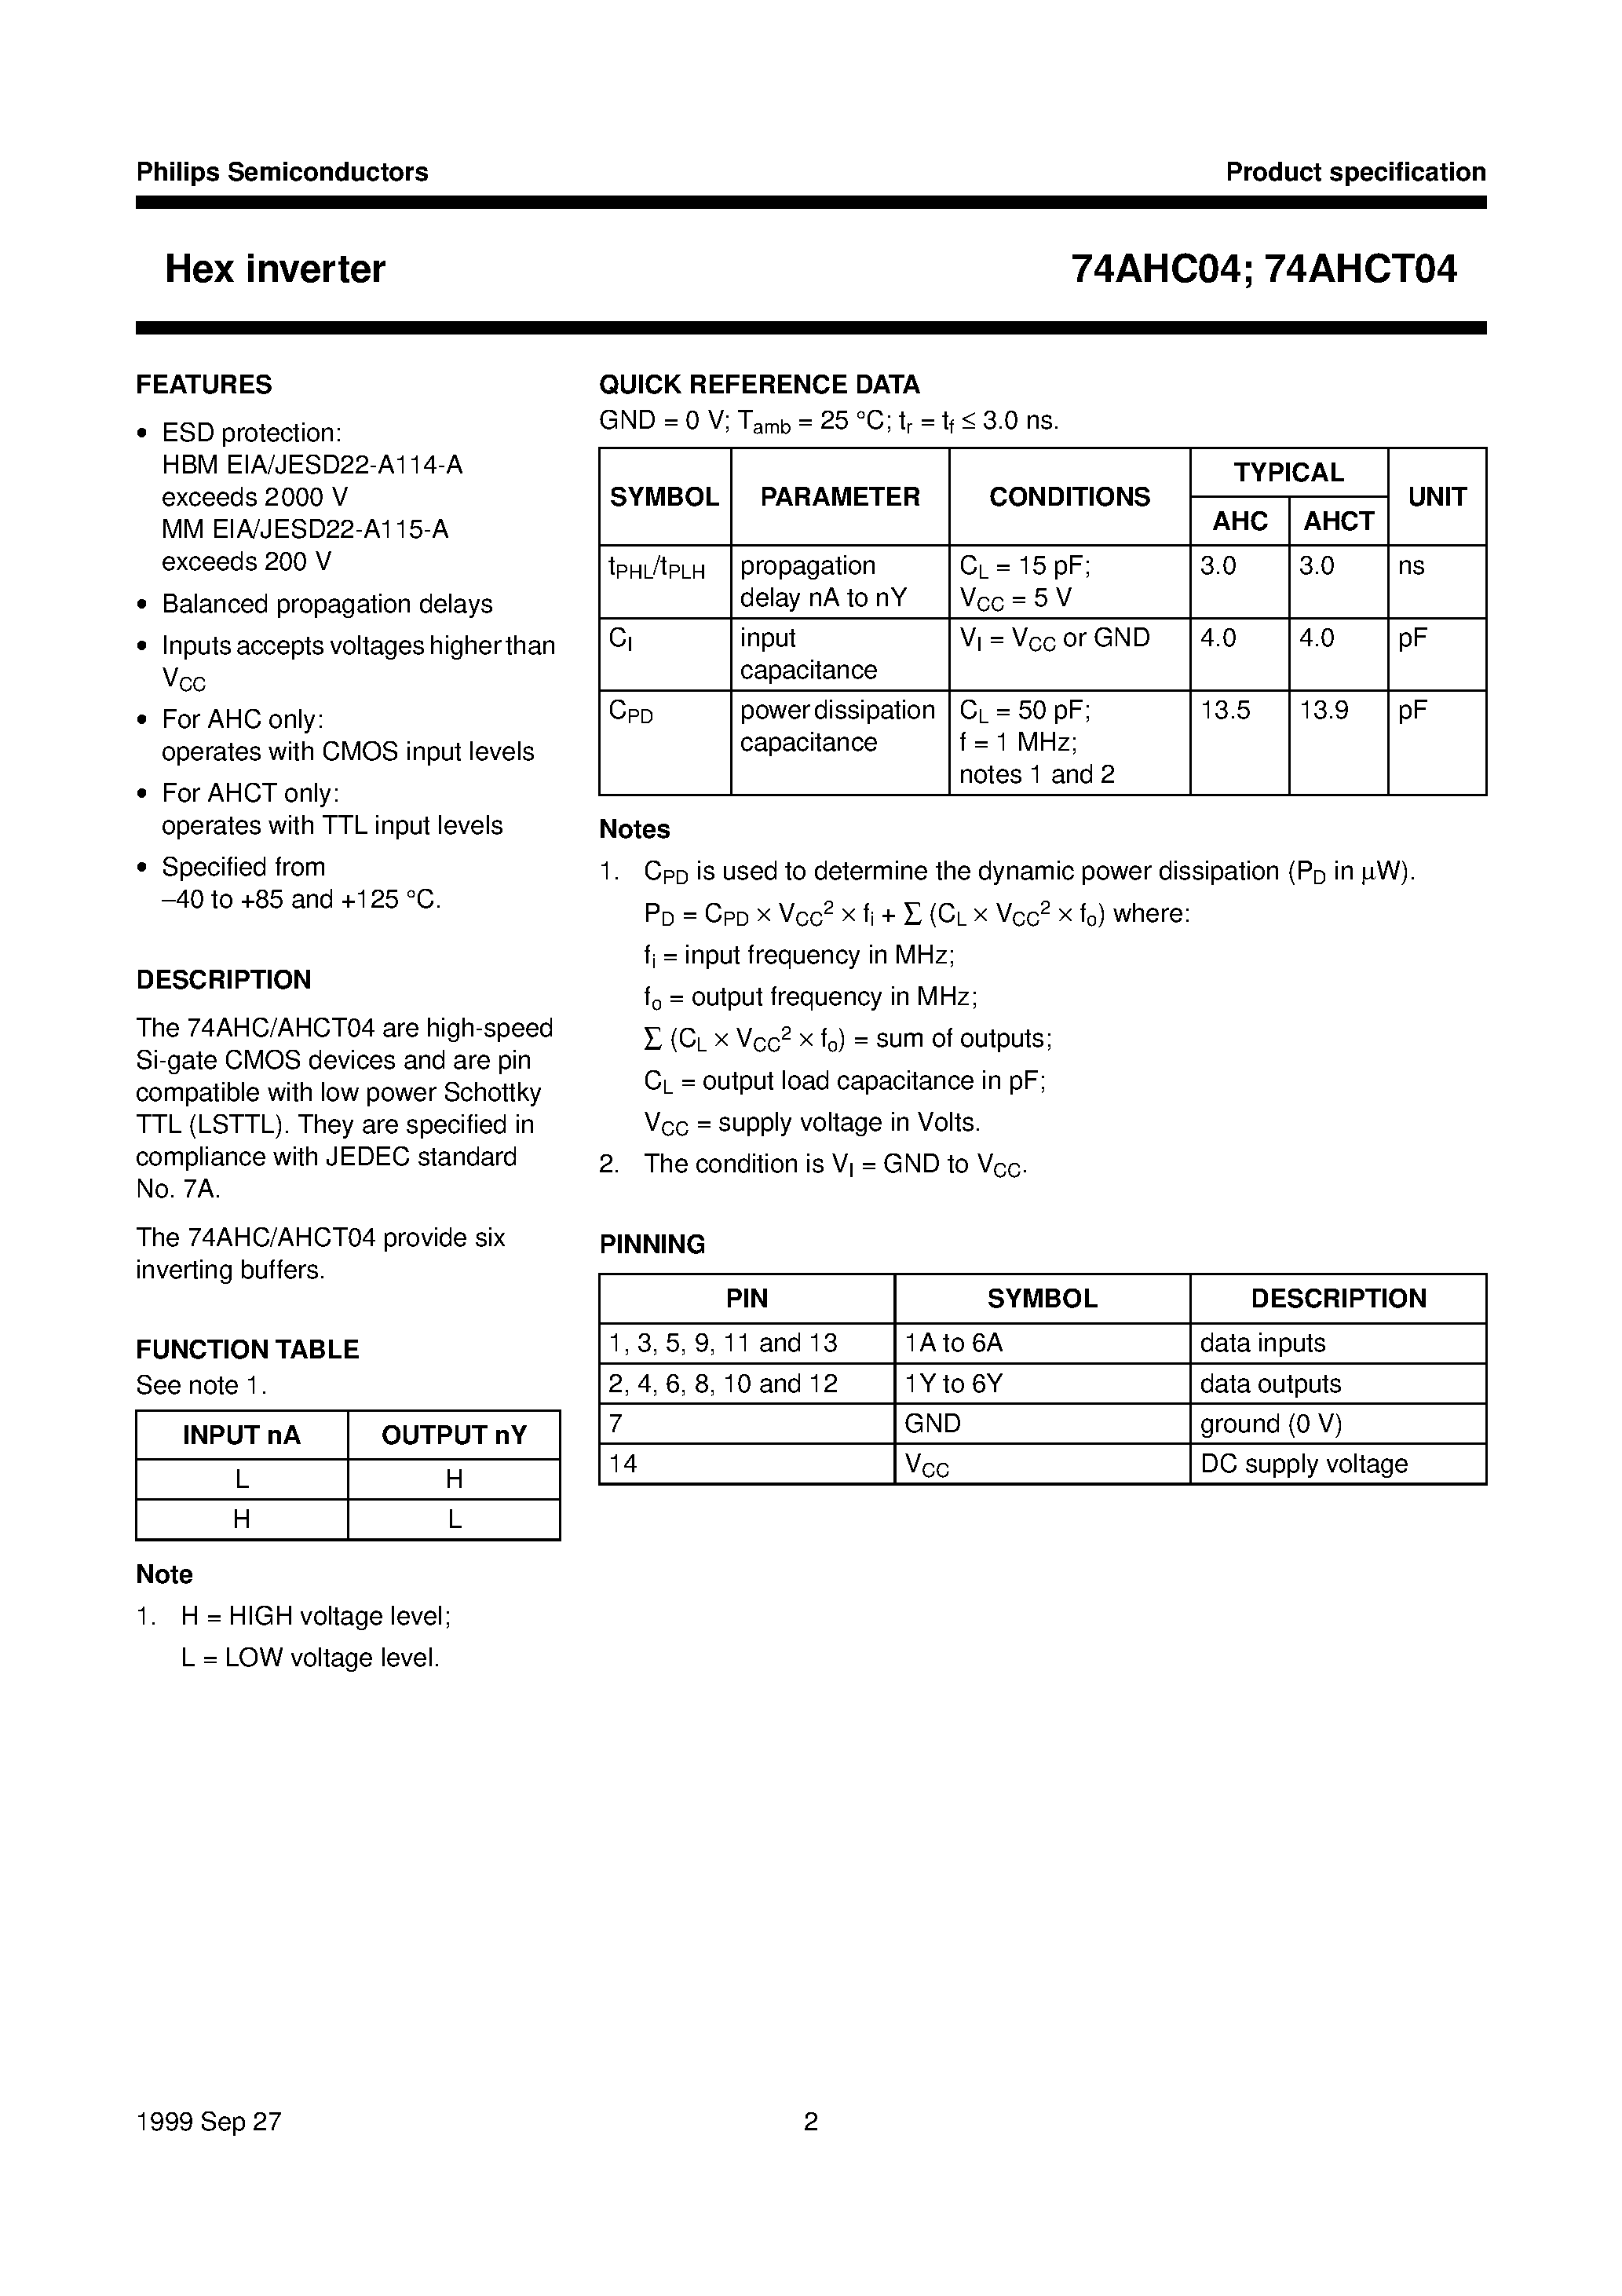 Datasheet 74AHC04PW - Hex inverter page 2